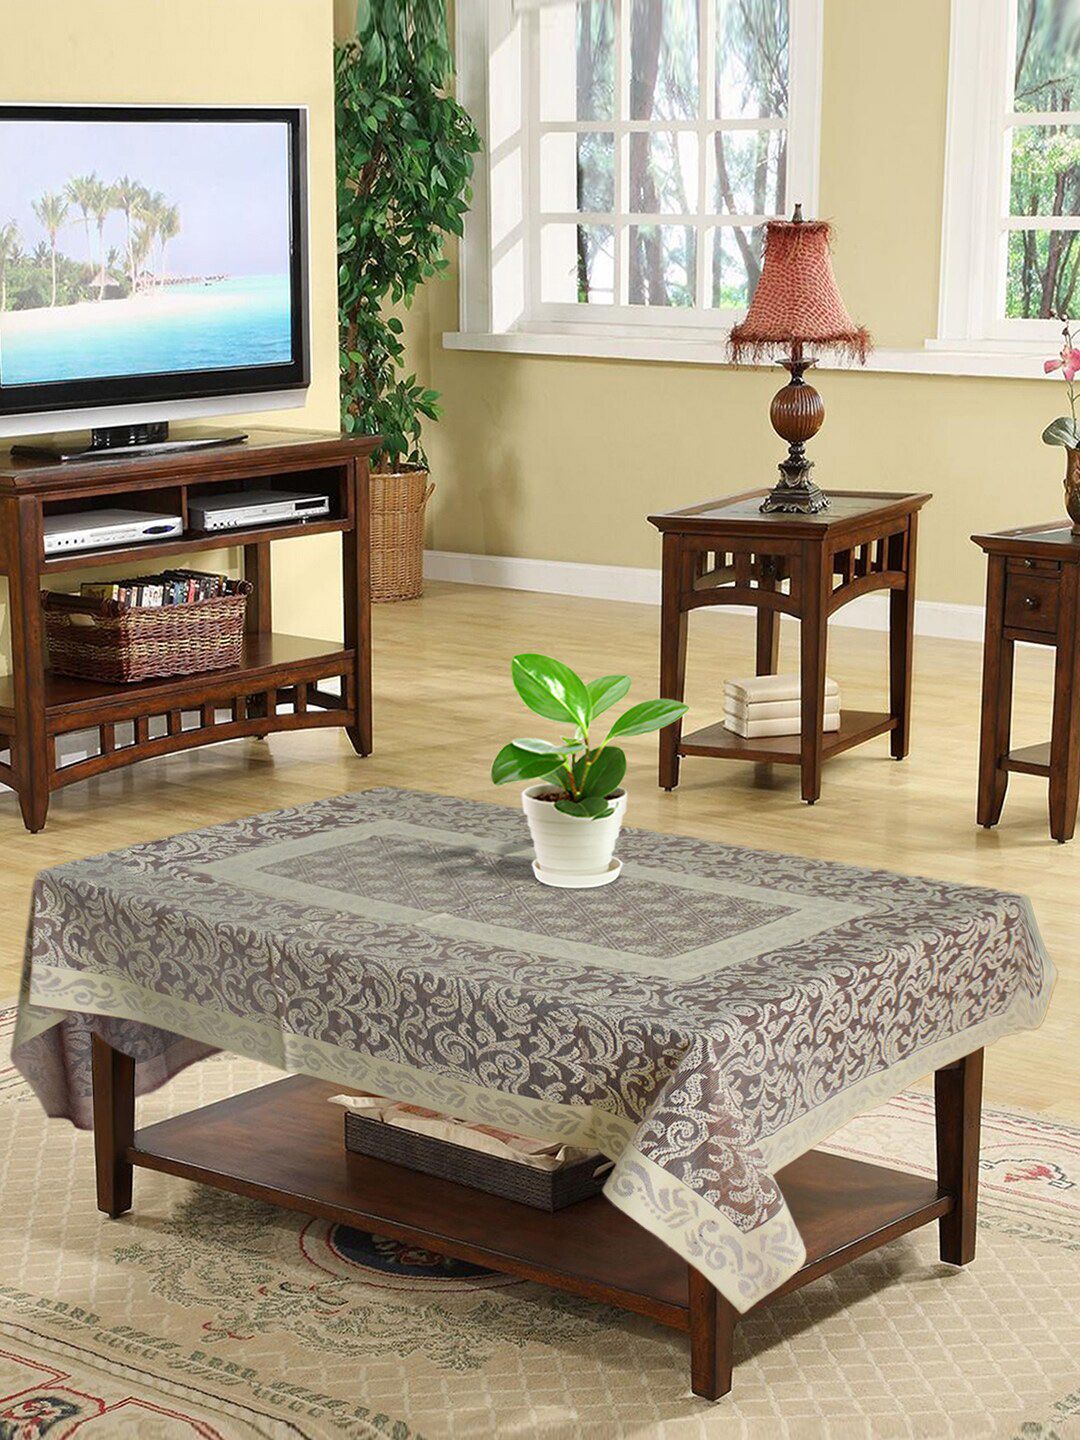 Kuber Industries Cream & Maroon Floral Printed Cotton 4 Seater Table Cover Price in India